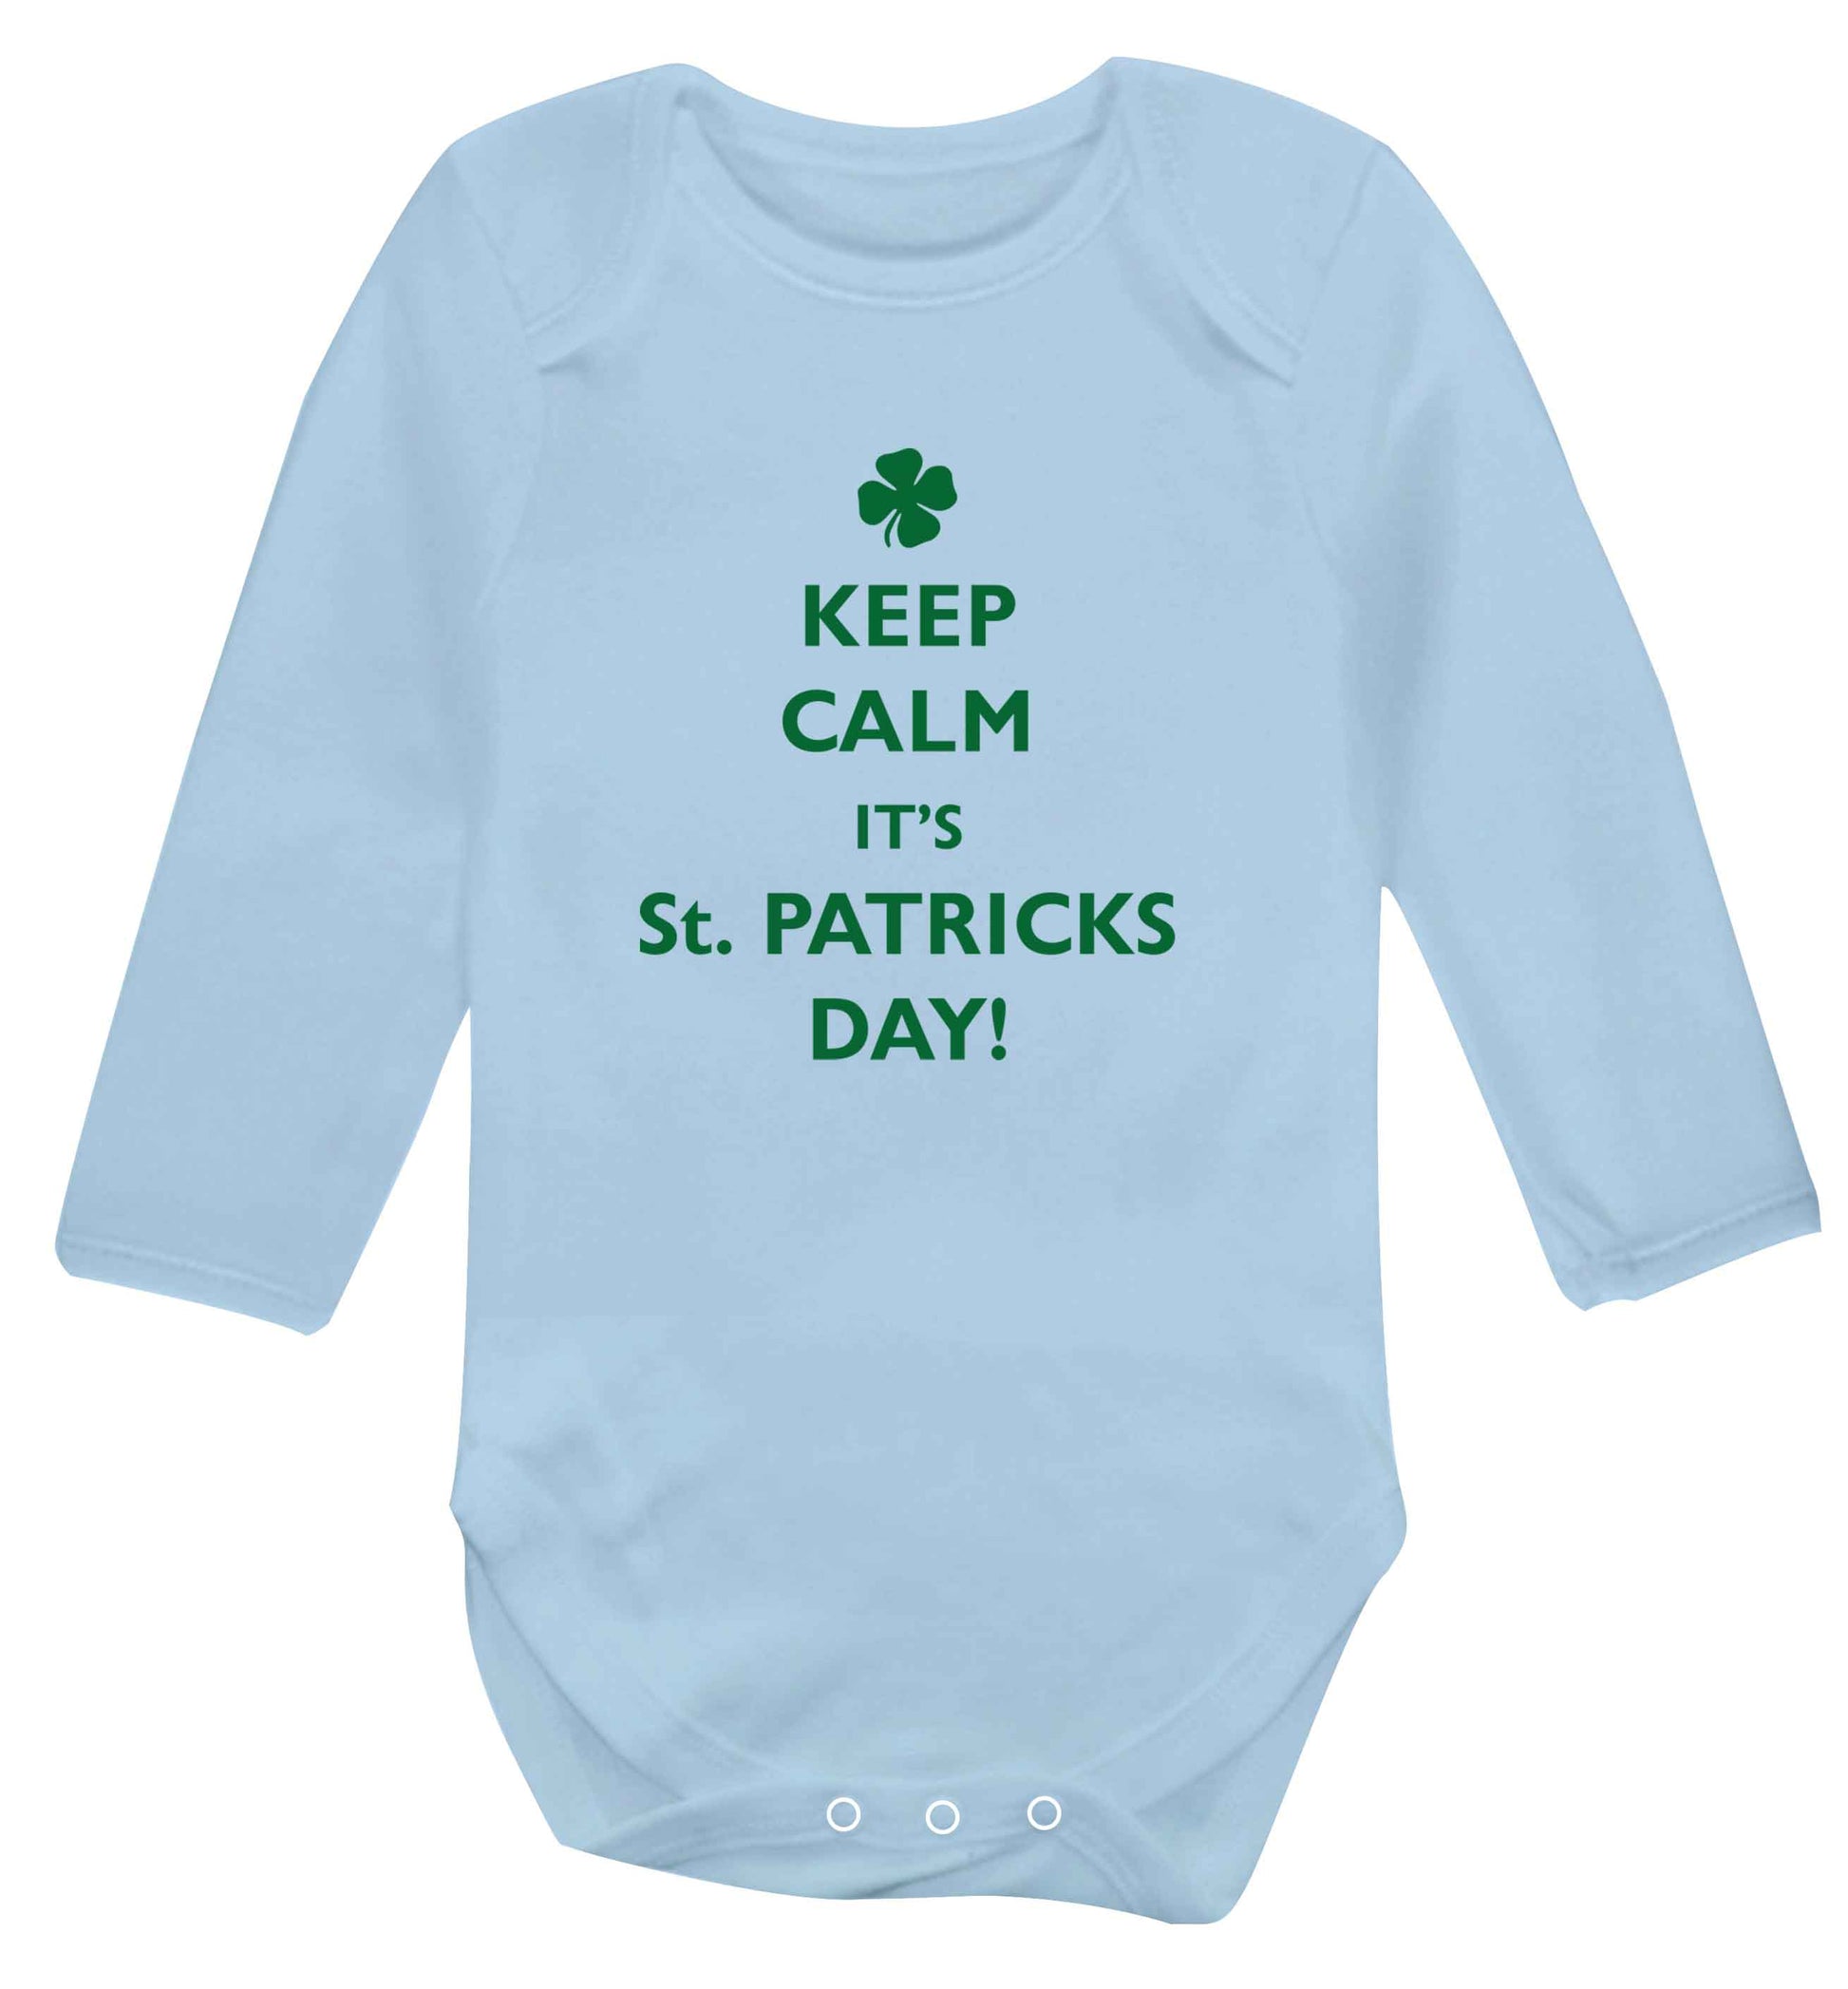 Keep calm it's St.Patricks day baby vest long sleeved pale blue 6-12 months